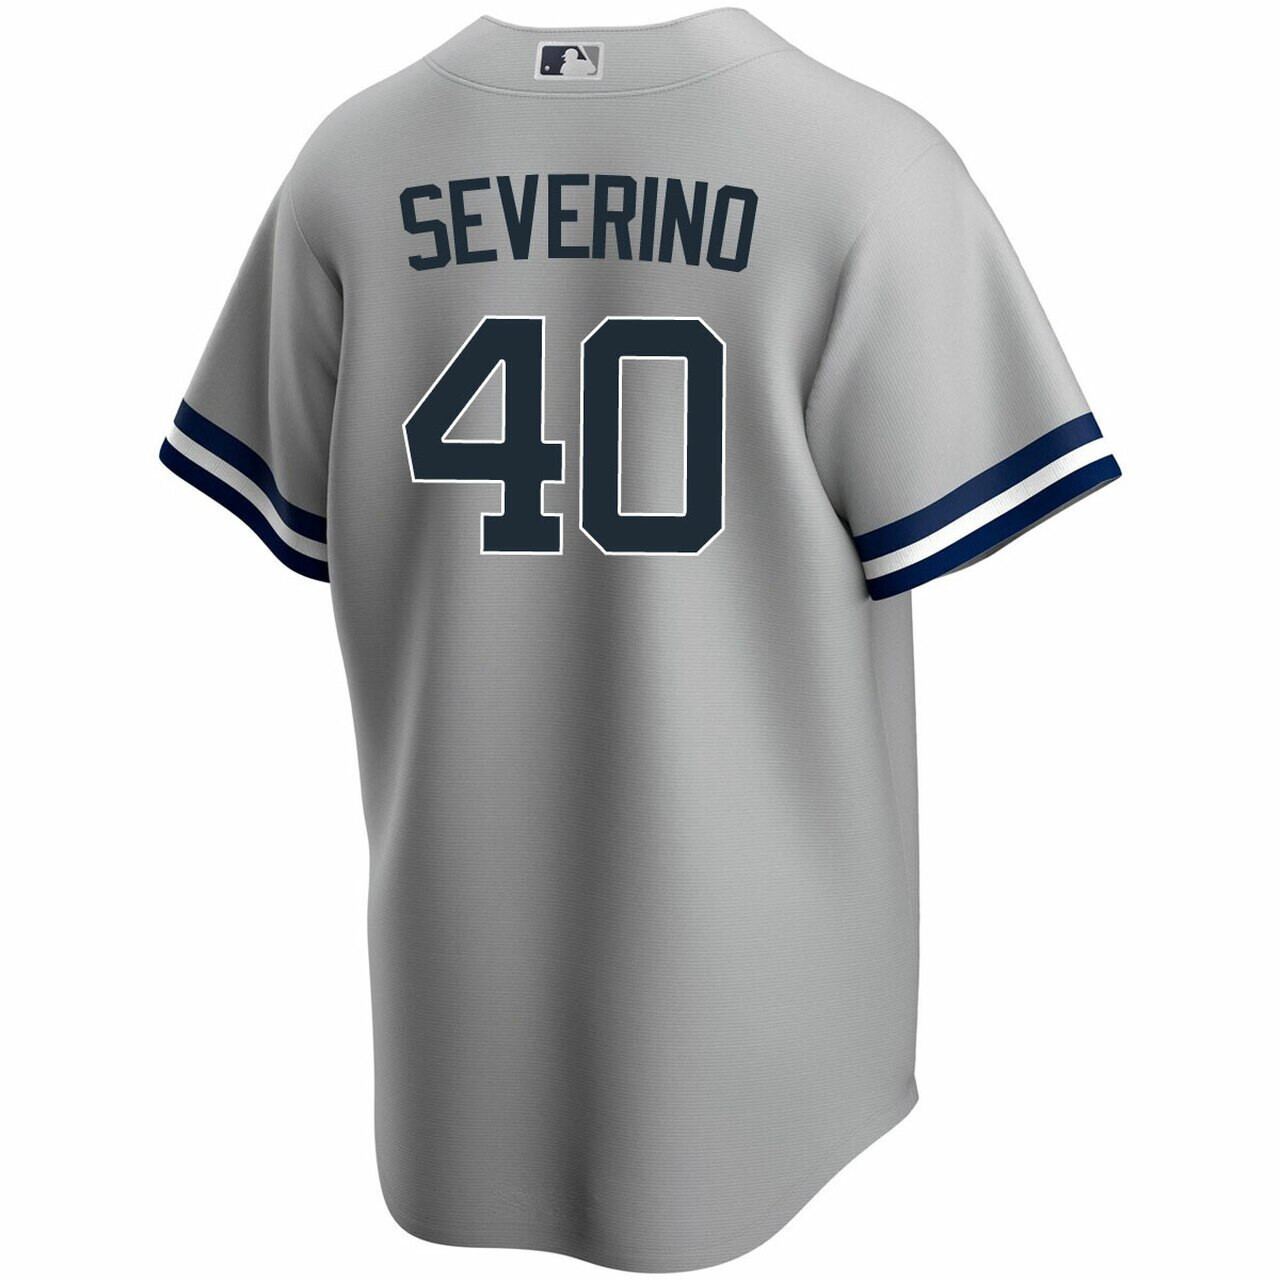 Fanatics Authentic Luis Severino New York Yankees Game-Used #40 Gray Jersey vs. St. Louis Cardinals on July 1, 2023 - Game One of Doubleheader